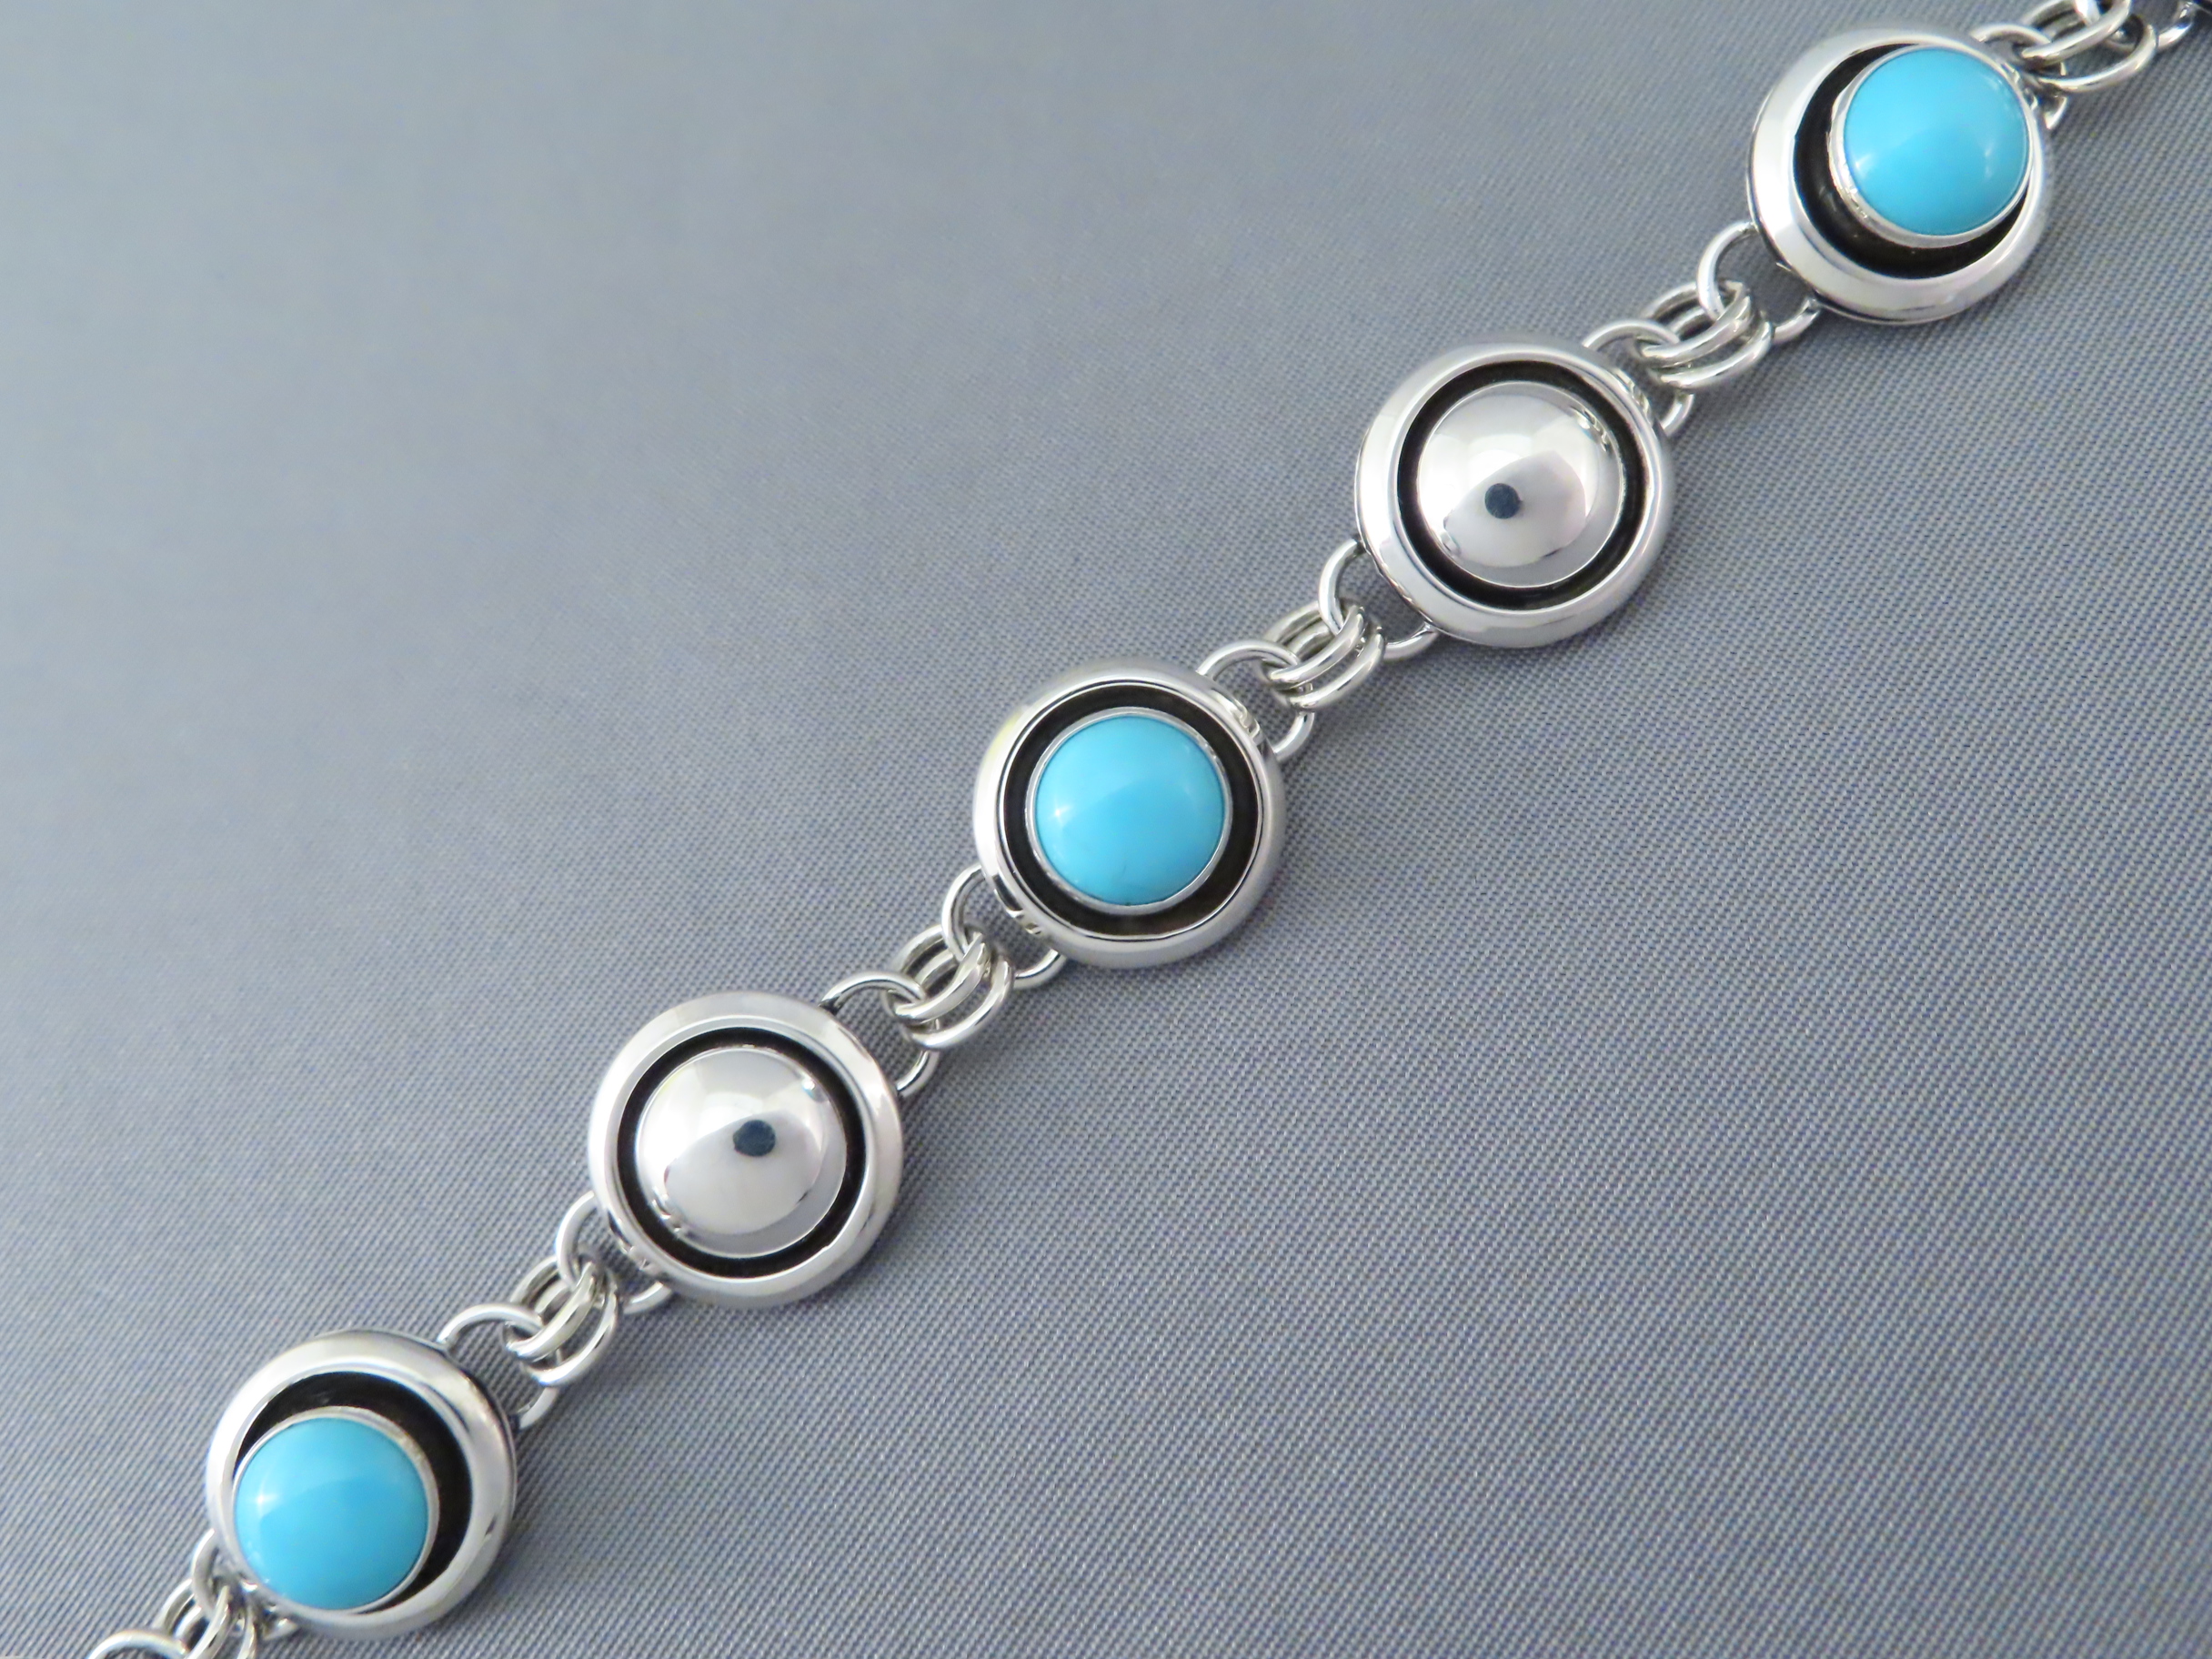 Sleeping Beauty Turquoise Link Bracelet by Artie Yellowhorse